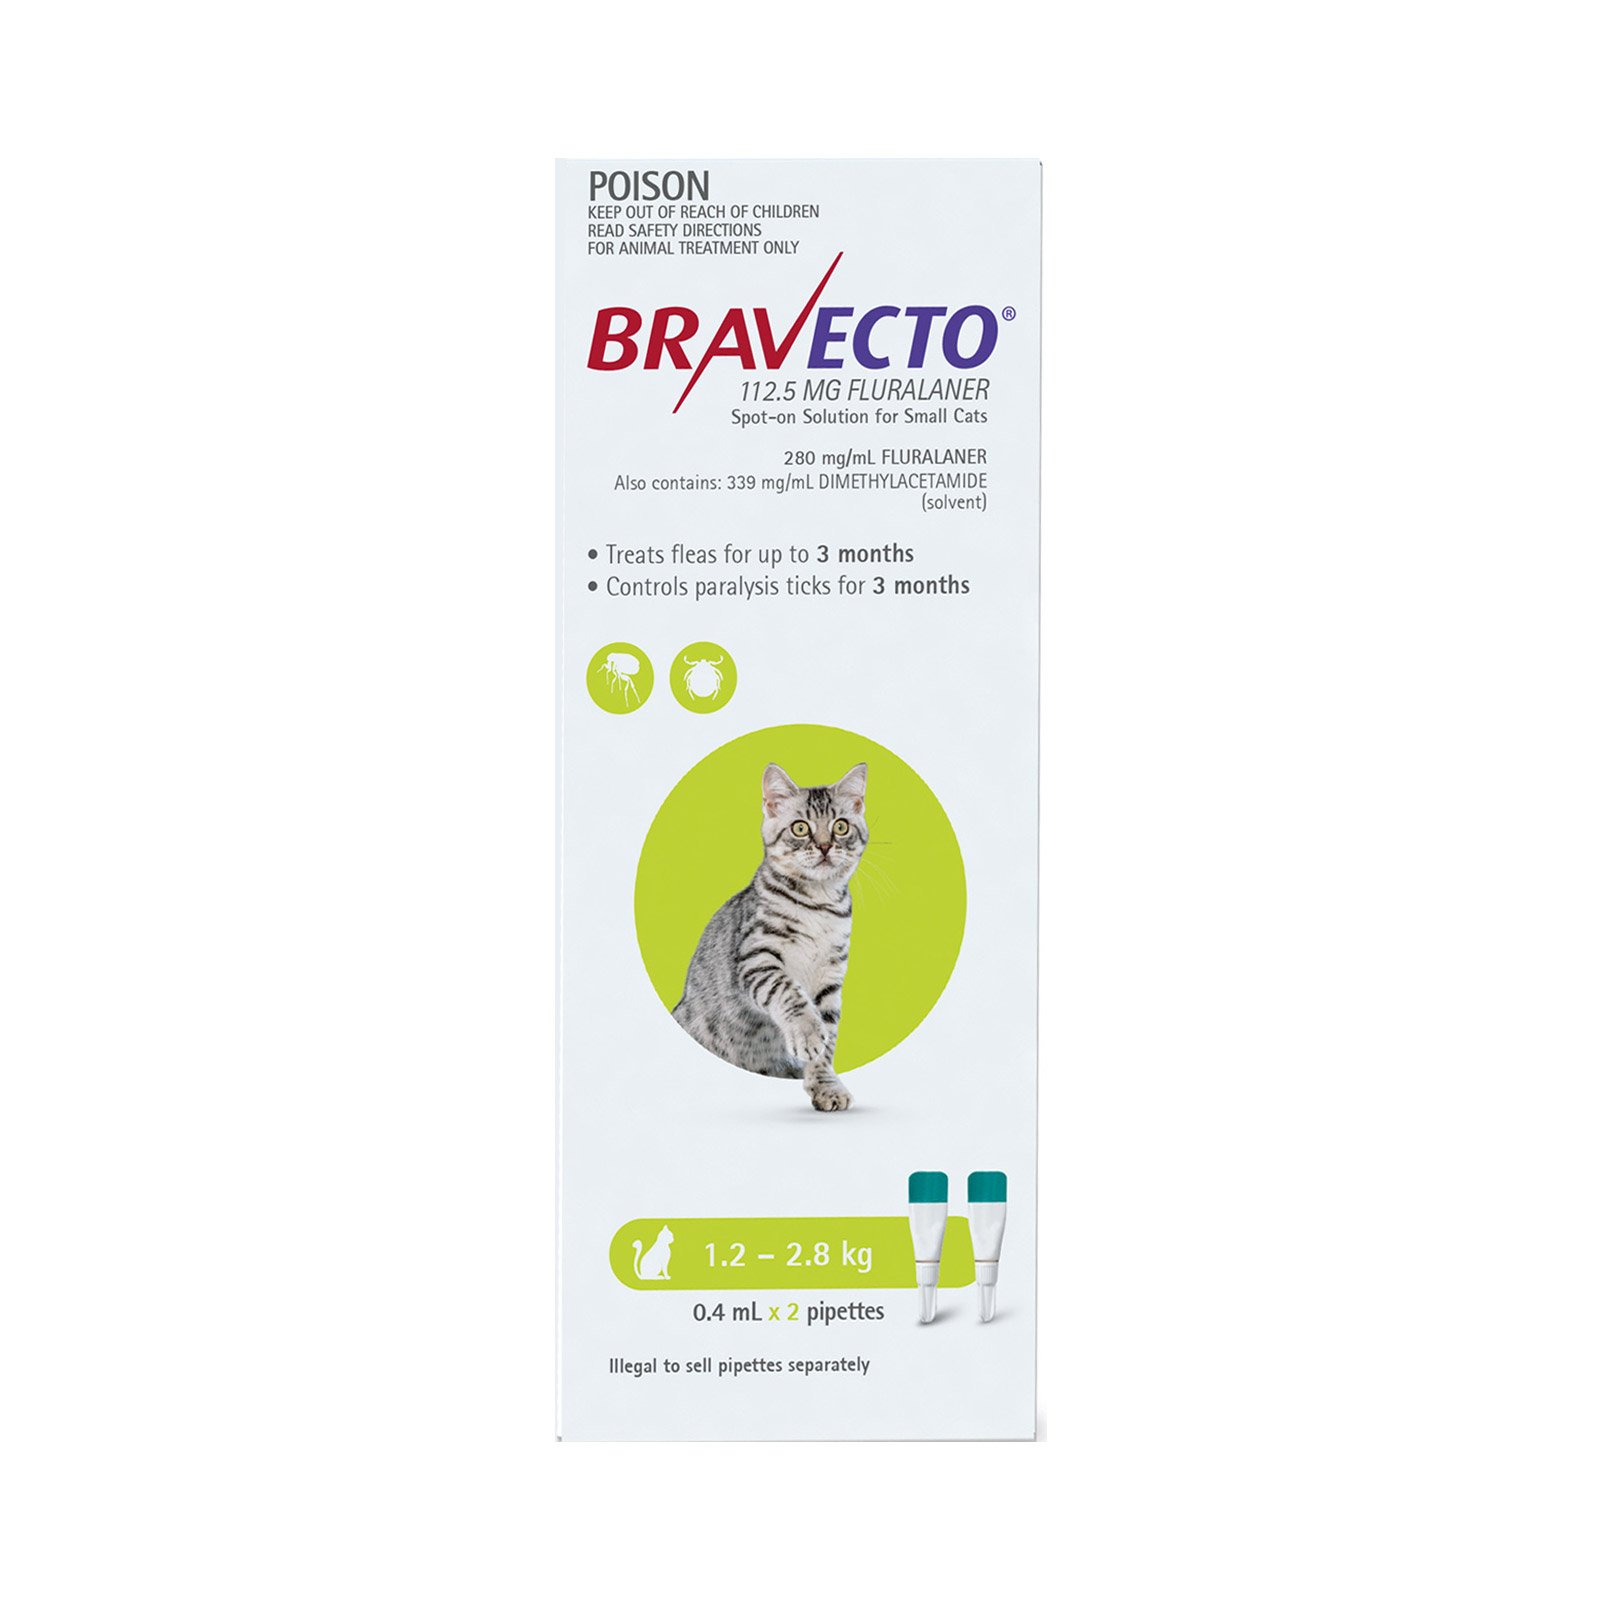 Bravecto Spot On For Small Cats (1.2 - 2.8 Kg) Light Green 2 Pipettes